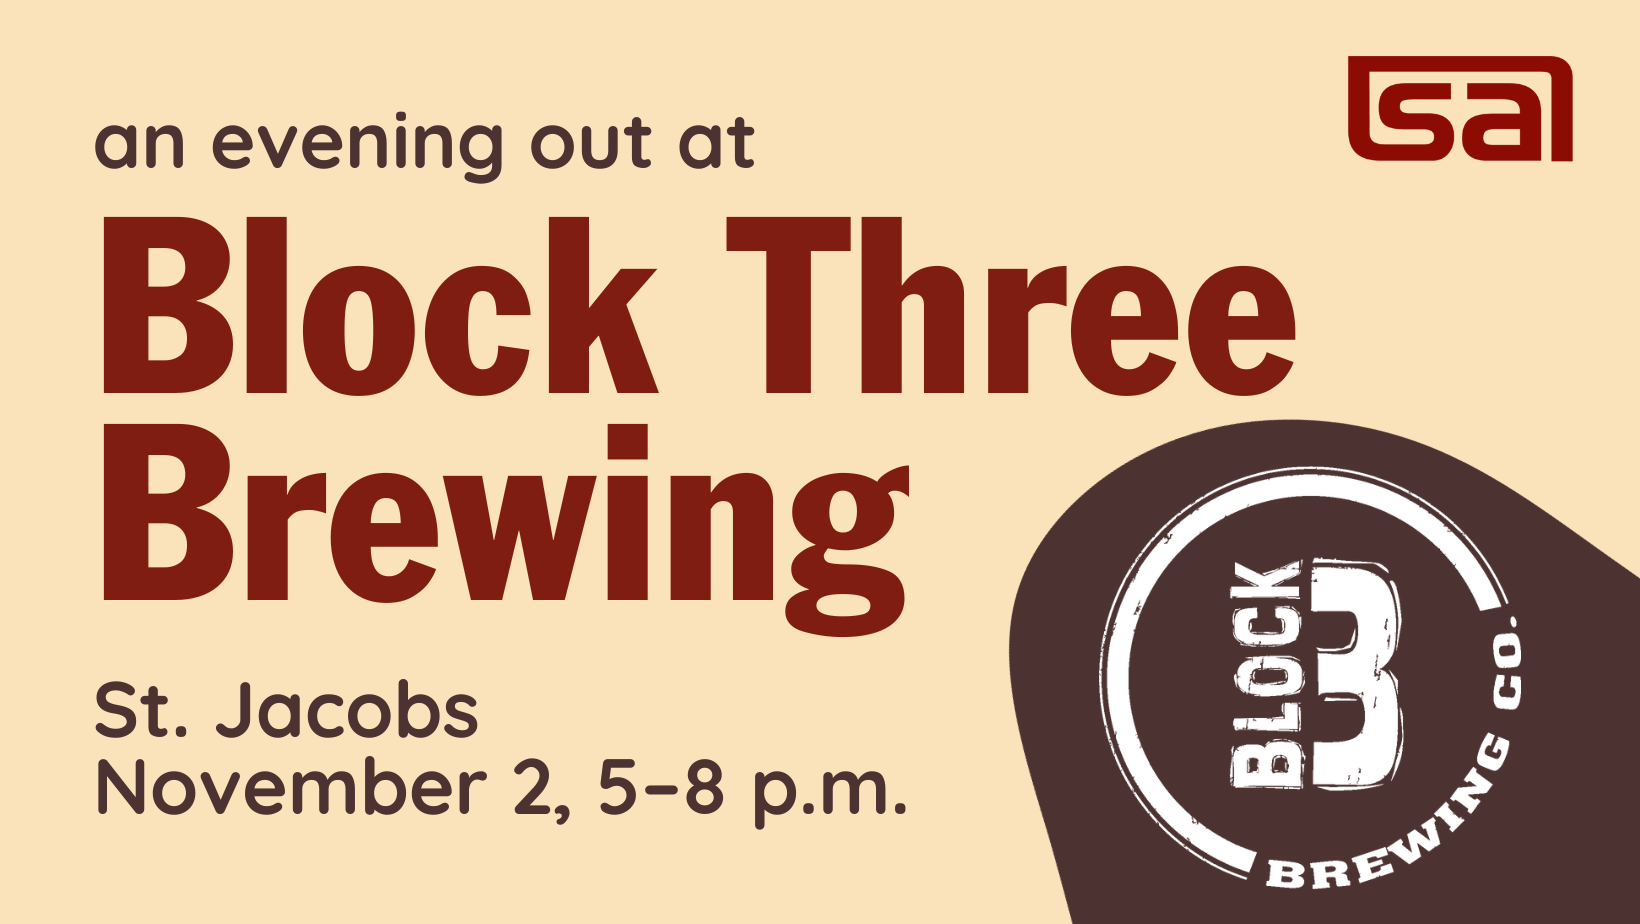 an evening out at Block Three Brewing, with the Block Three Brewing Company logo.